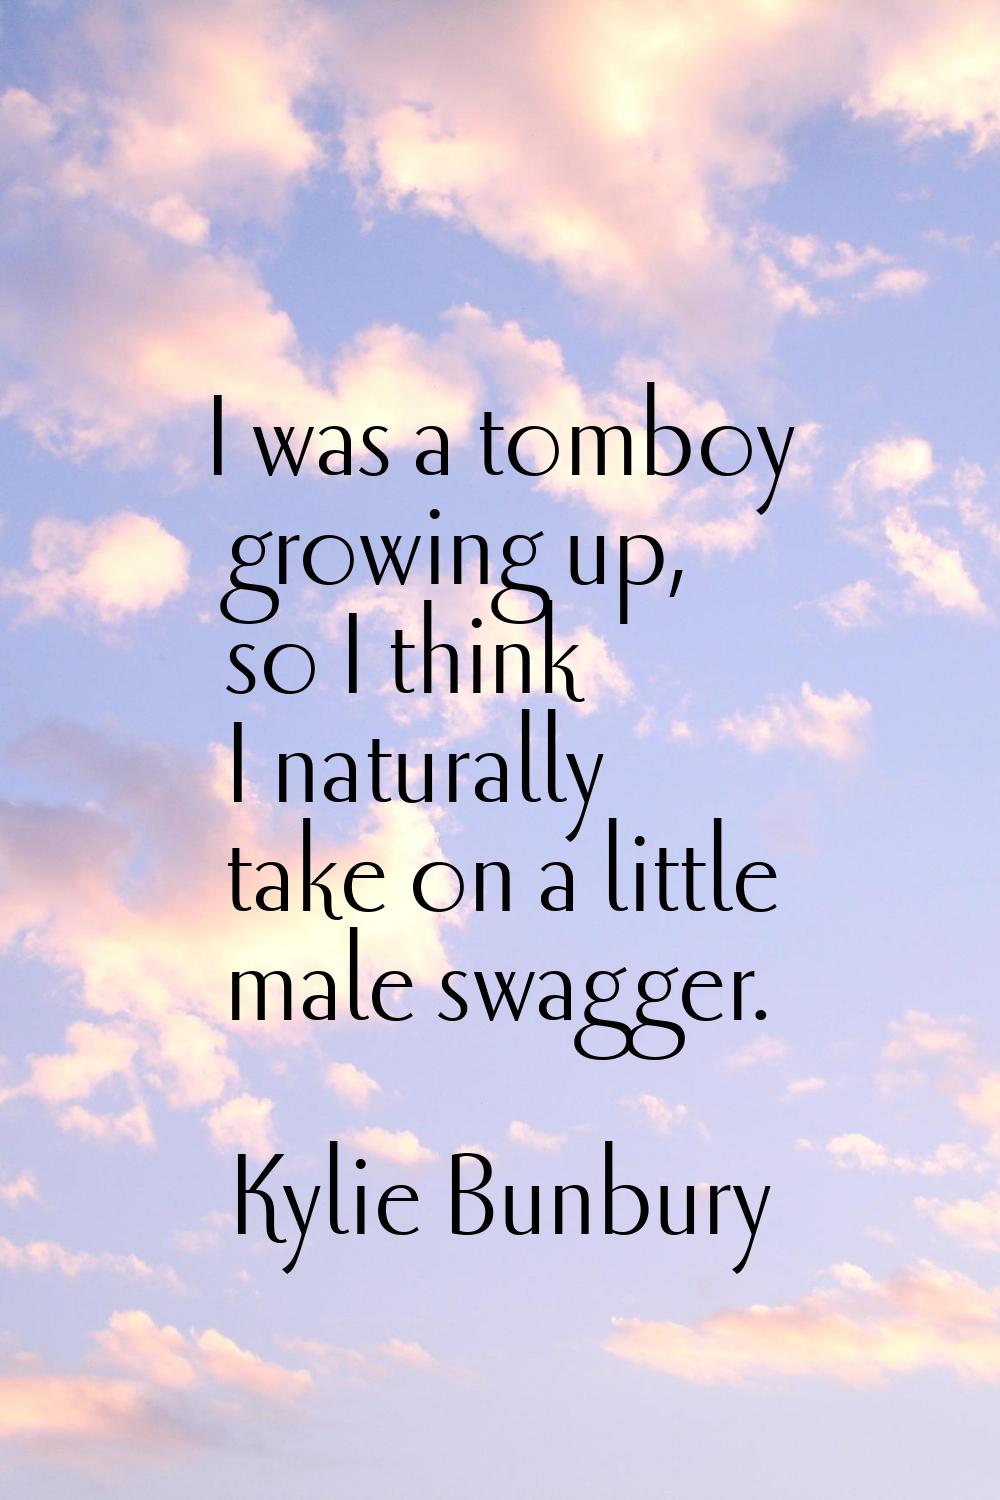 I was a tomboy growing up, so I think I naturally take on a little male swagger.